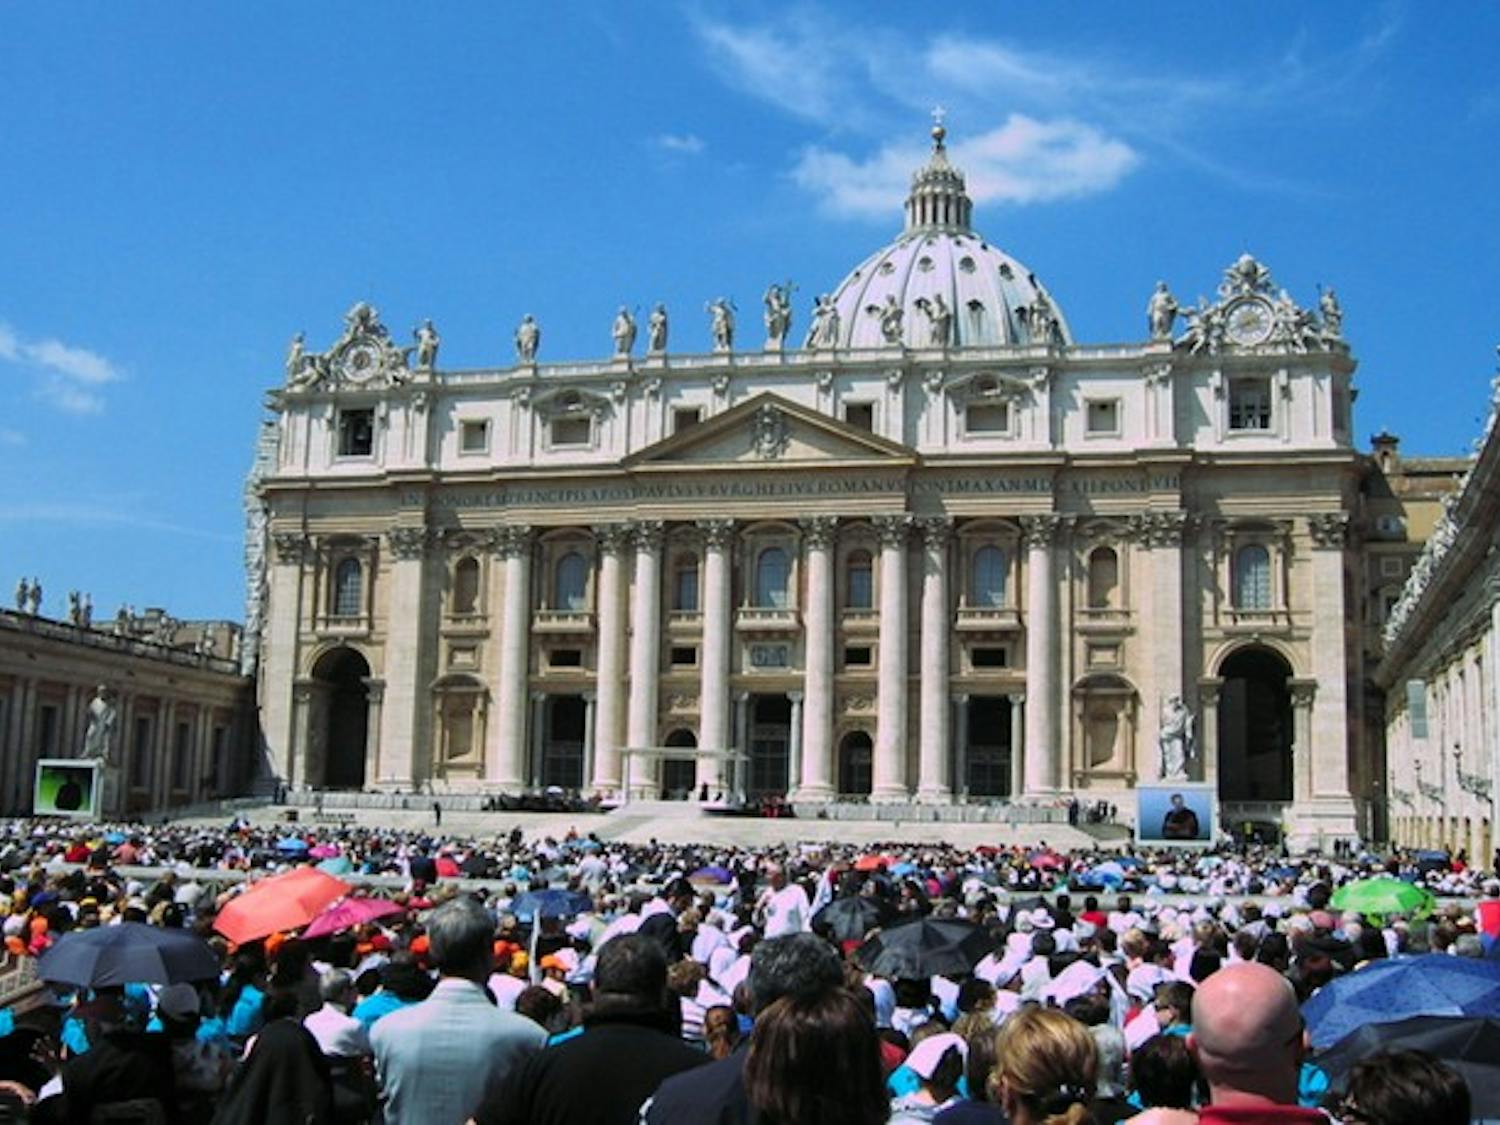 Crowds hoping to glimpse Benedict XVI outside St. Peter's disrupt class on the art history Foreign Study Program.